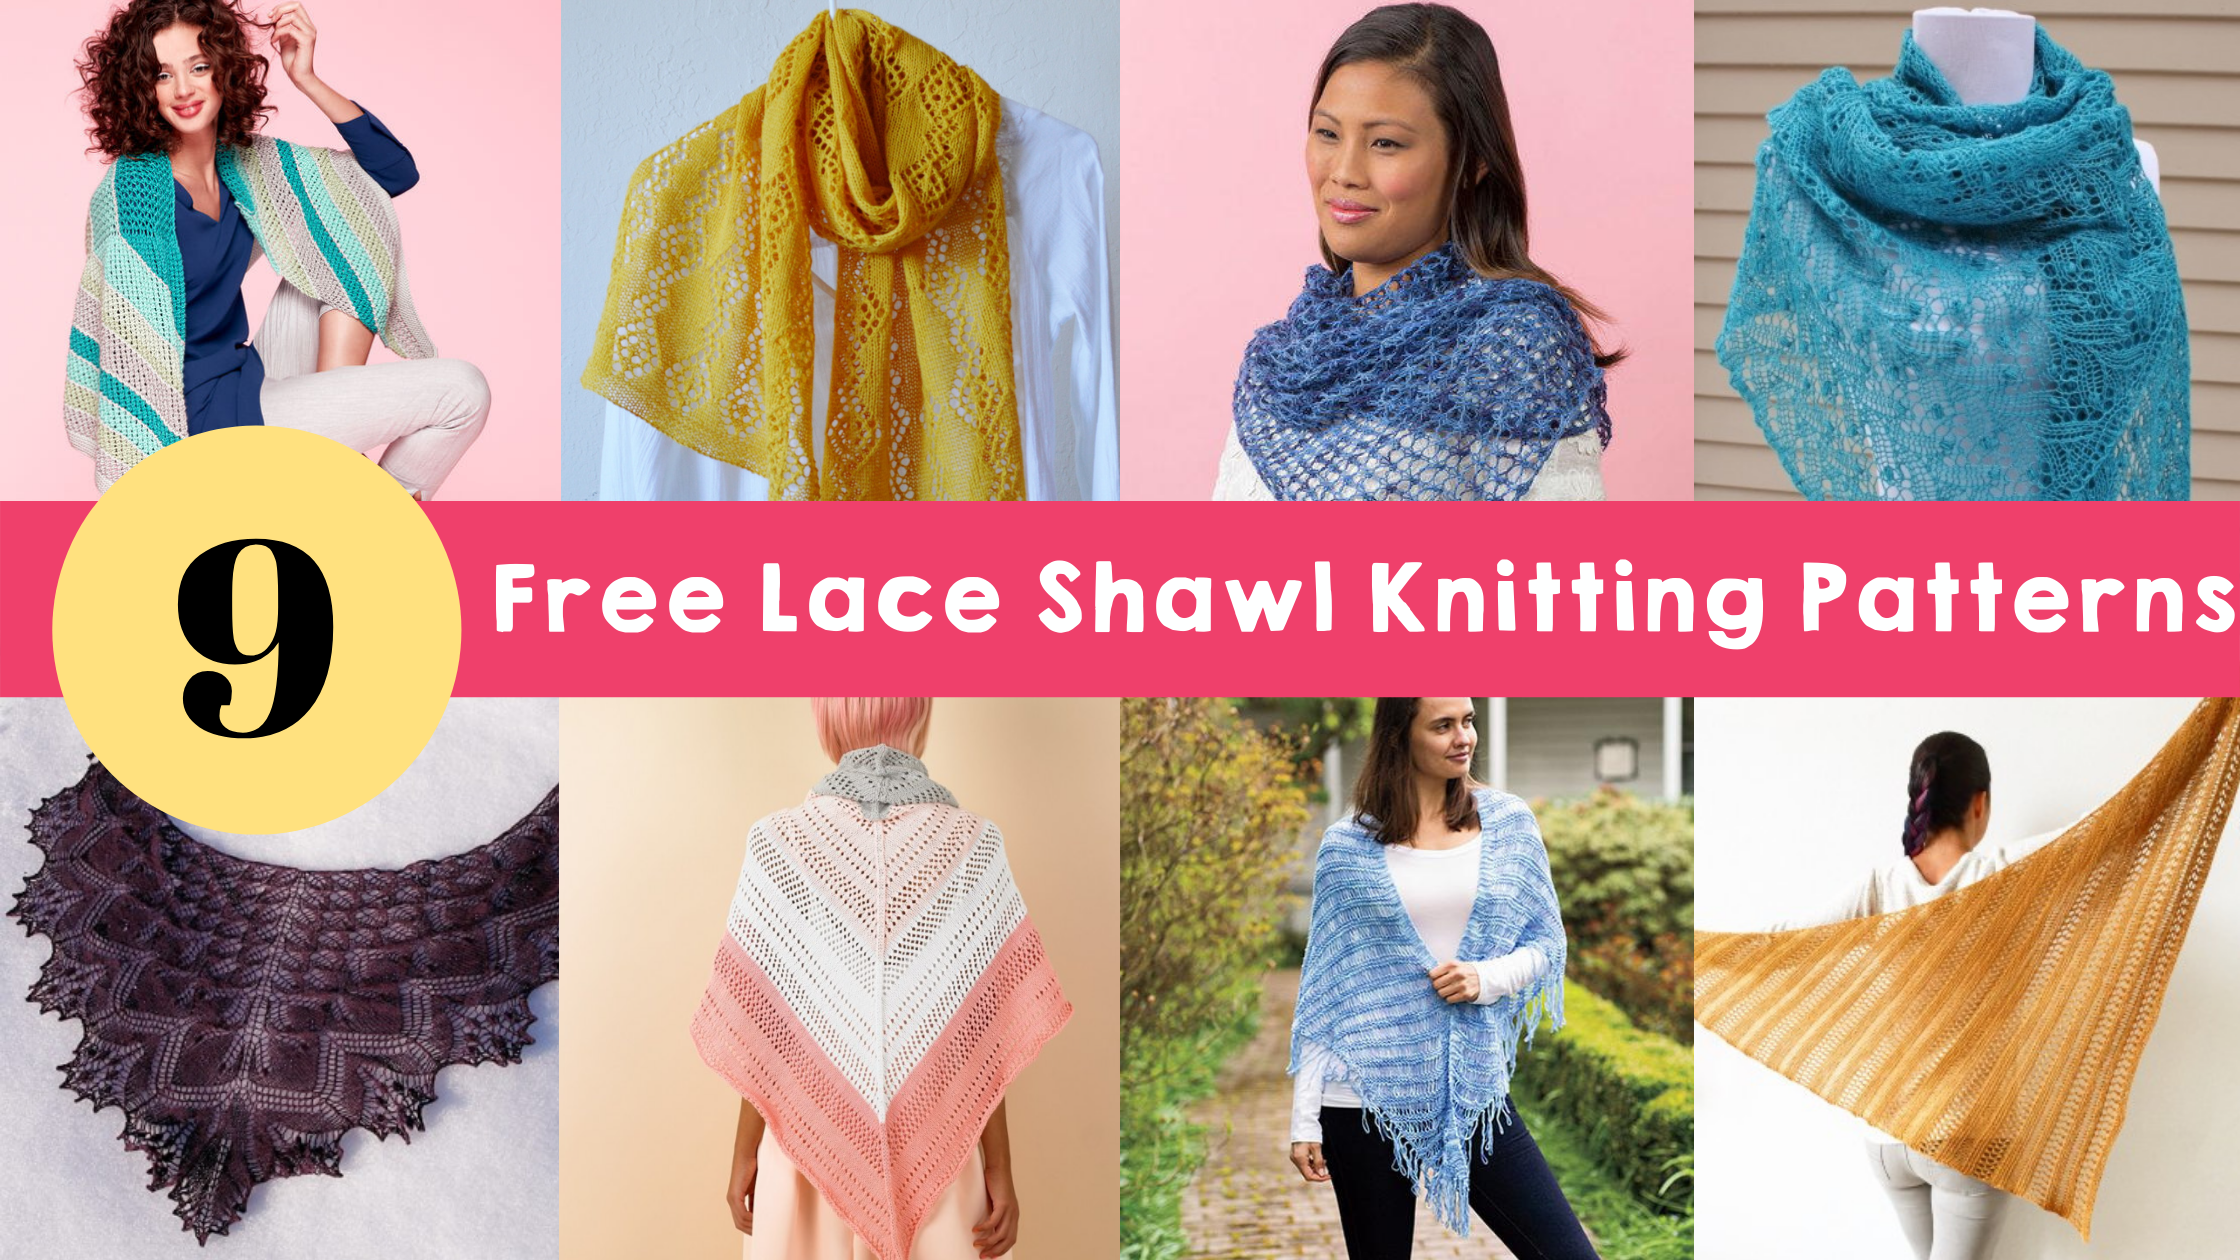 https://www.letsknit.co.uk/images/content/blog-images/Free_Lace_Shawl_Knitting_Patterns_-_Copy.png